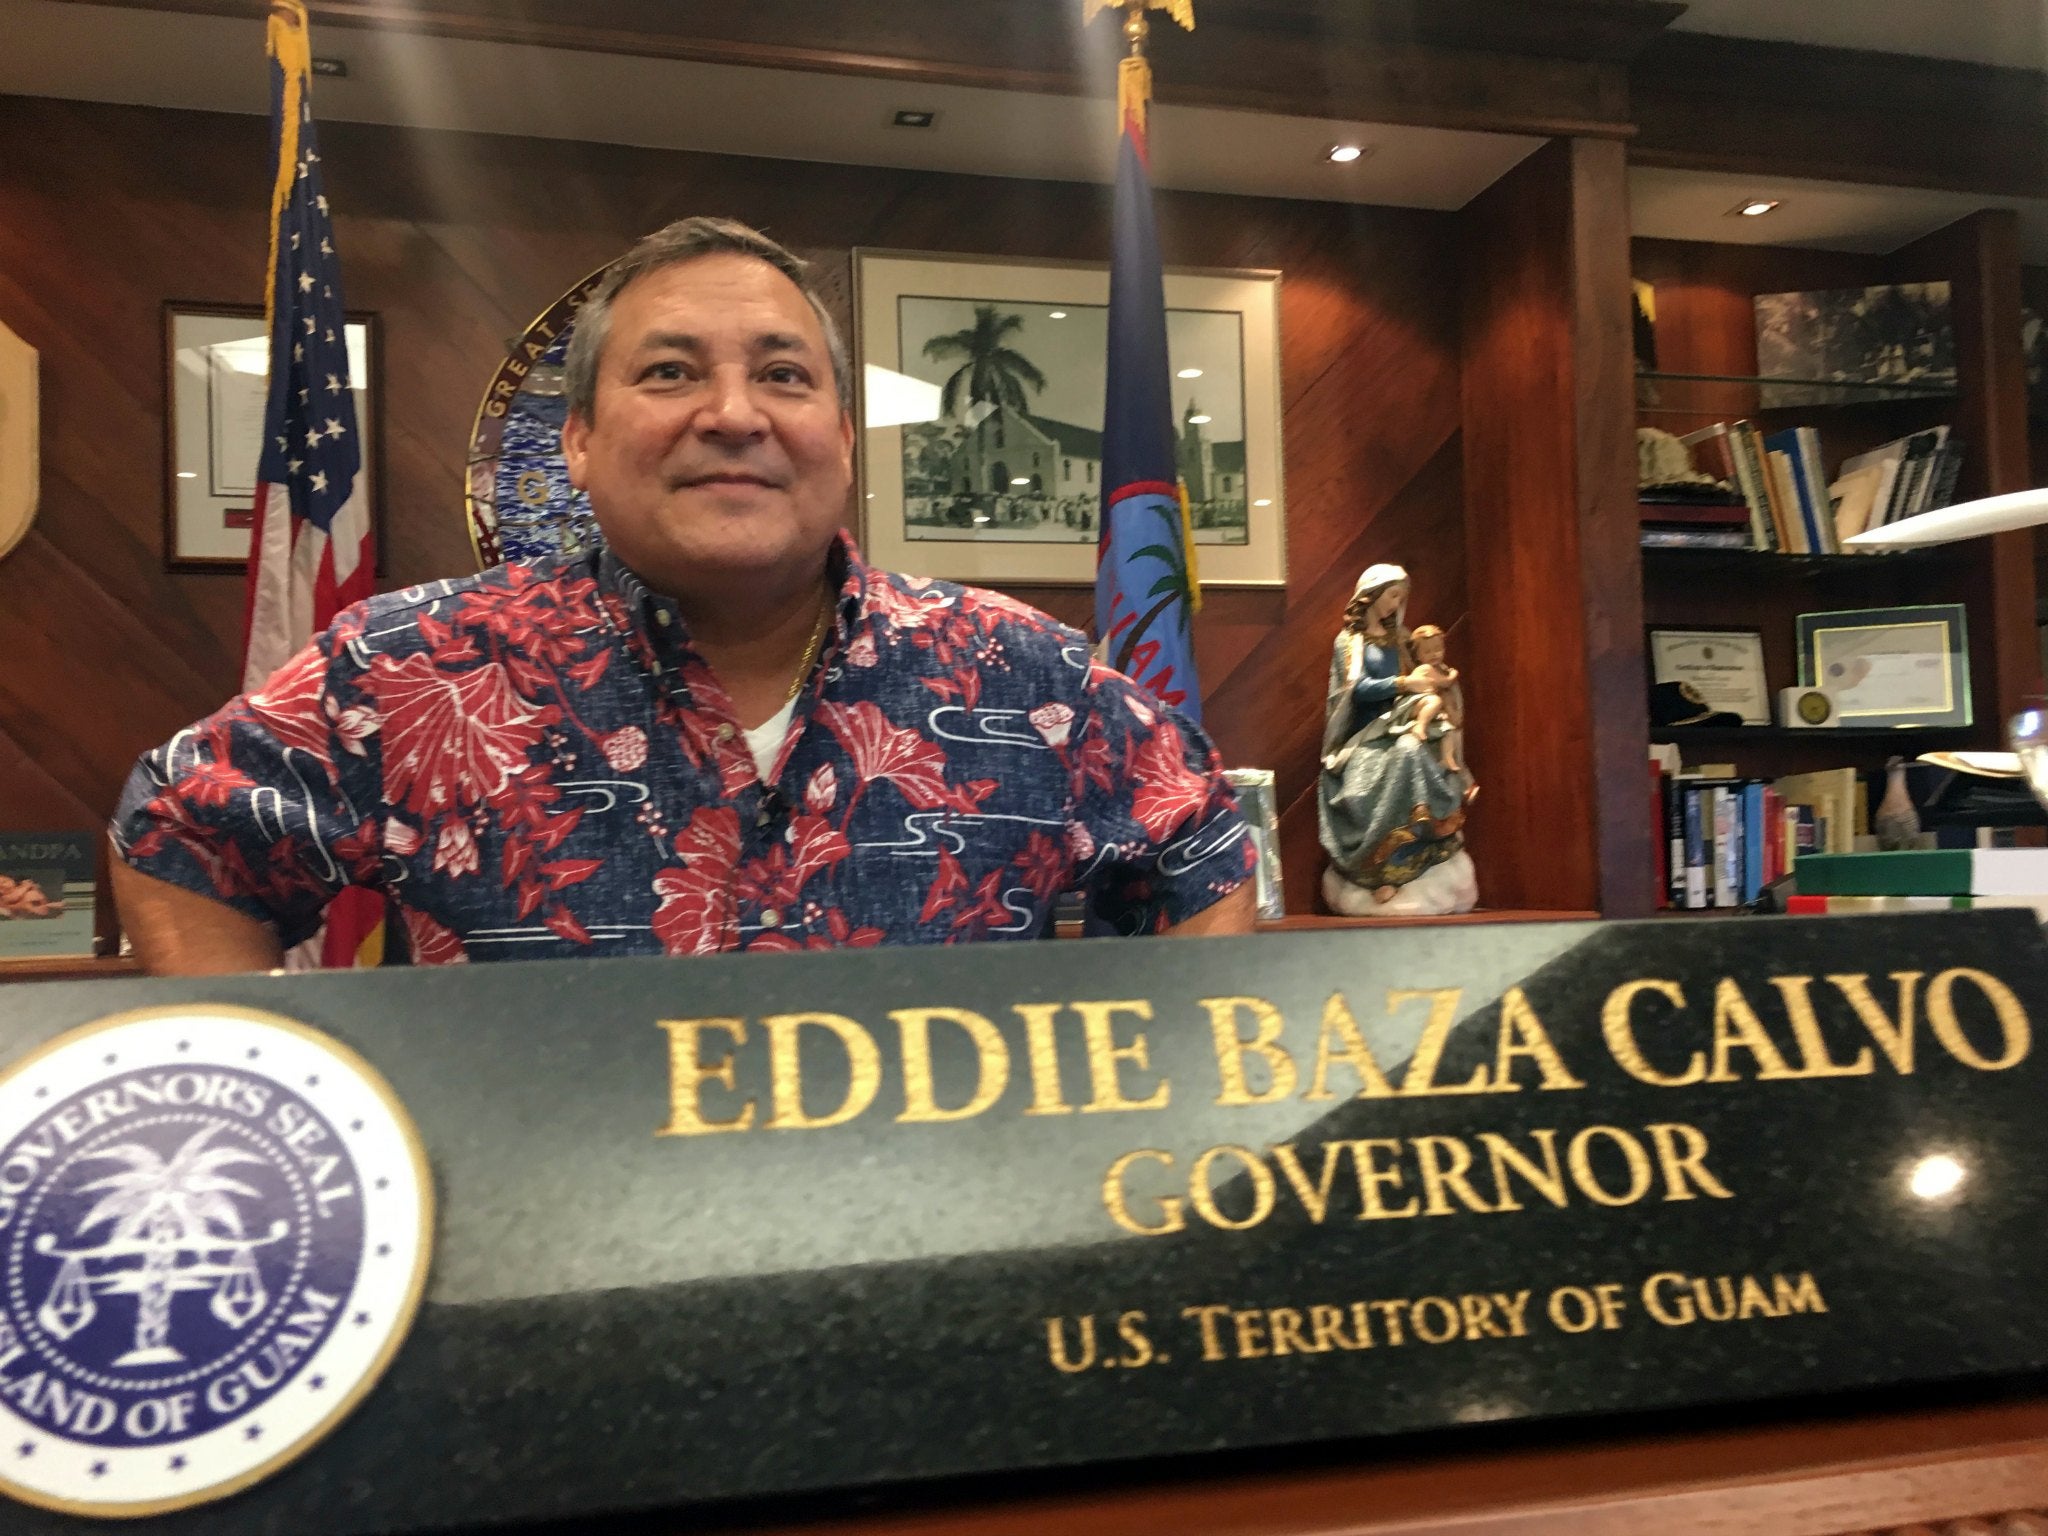 Guam Gov. Guam Eddie Baza Calvo, seen here on Aug. 11, 2017, has sought to assure his citizens even as Guam released an advisory on surviving a missile attack.